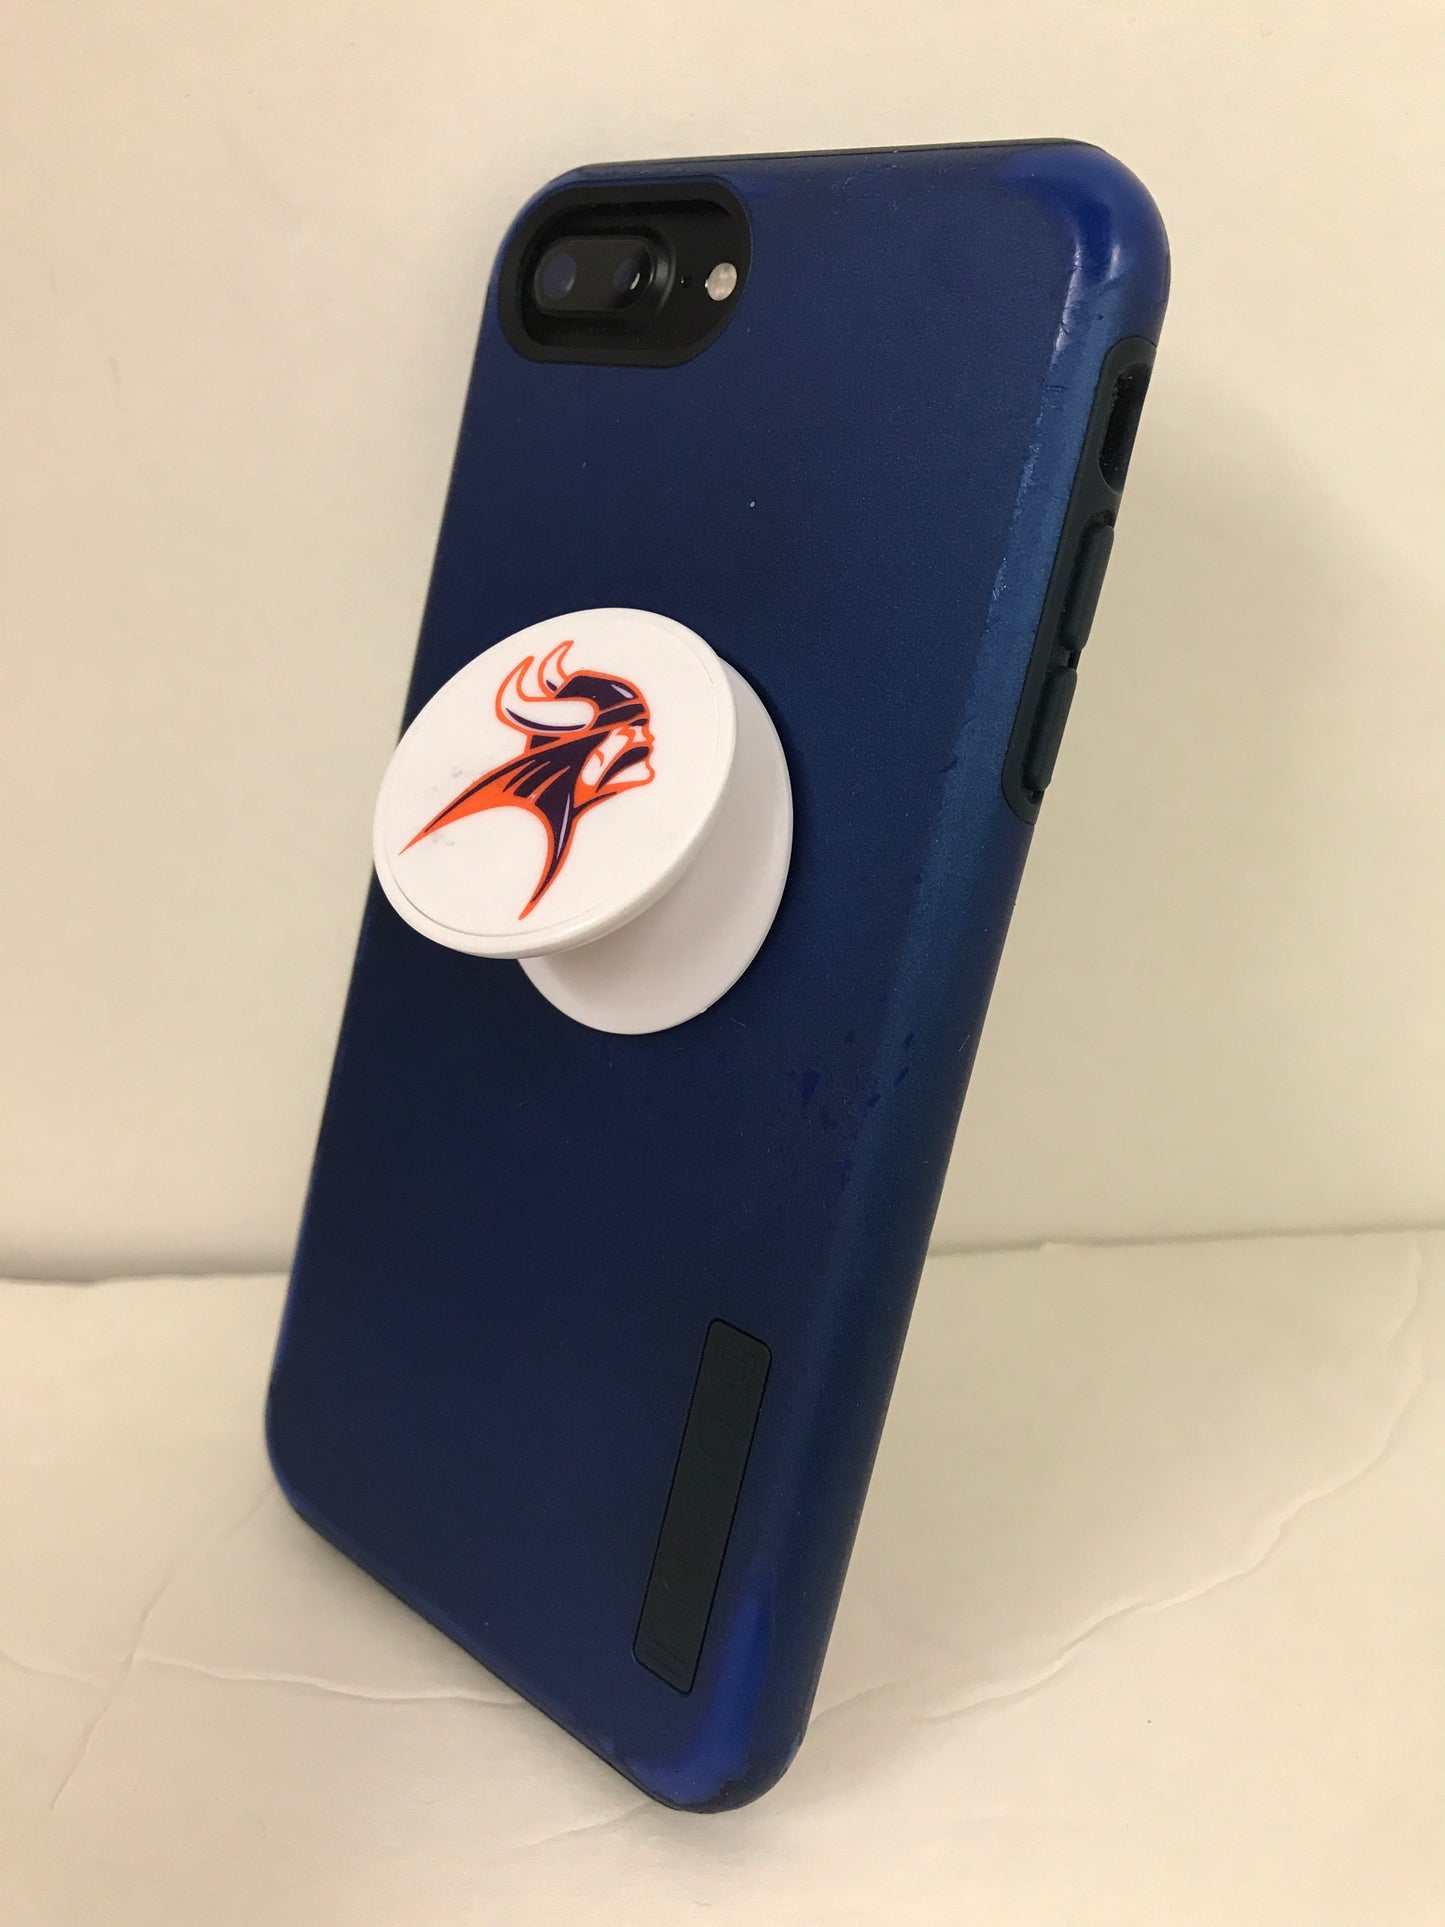 Missouri Valley Accessories-PopSockets with Viking head logo